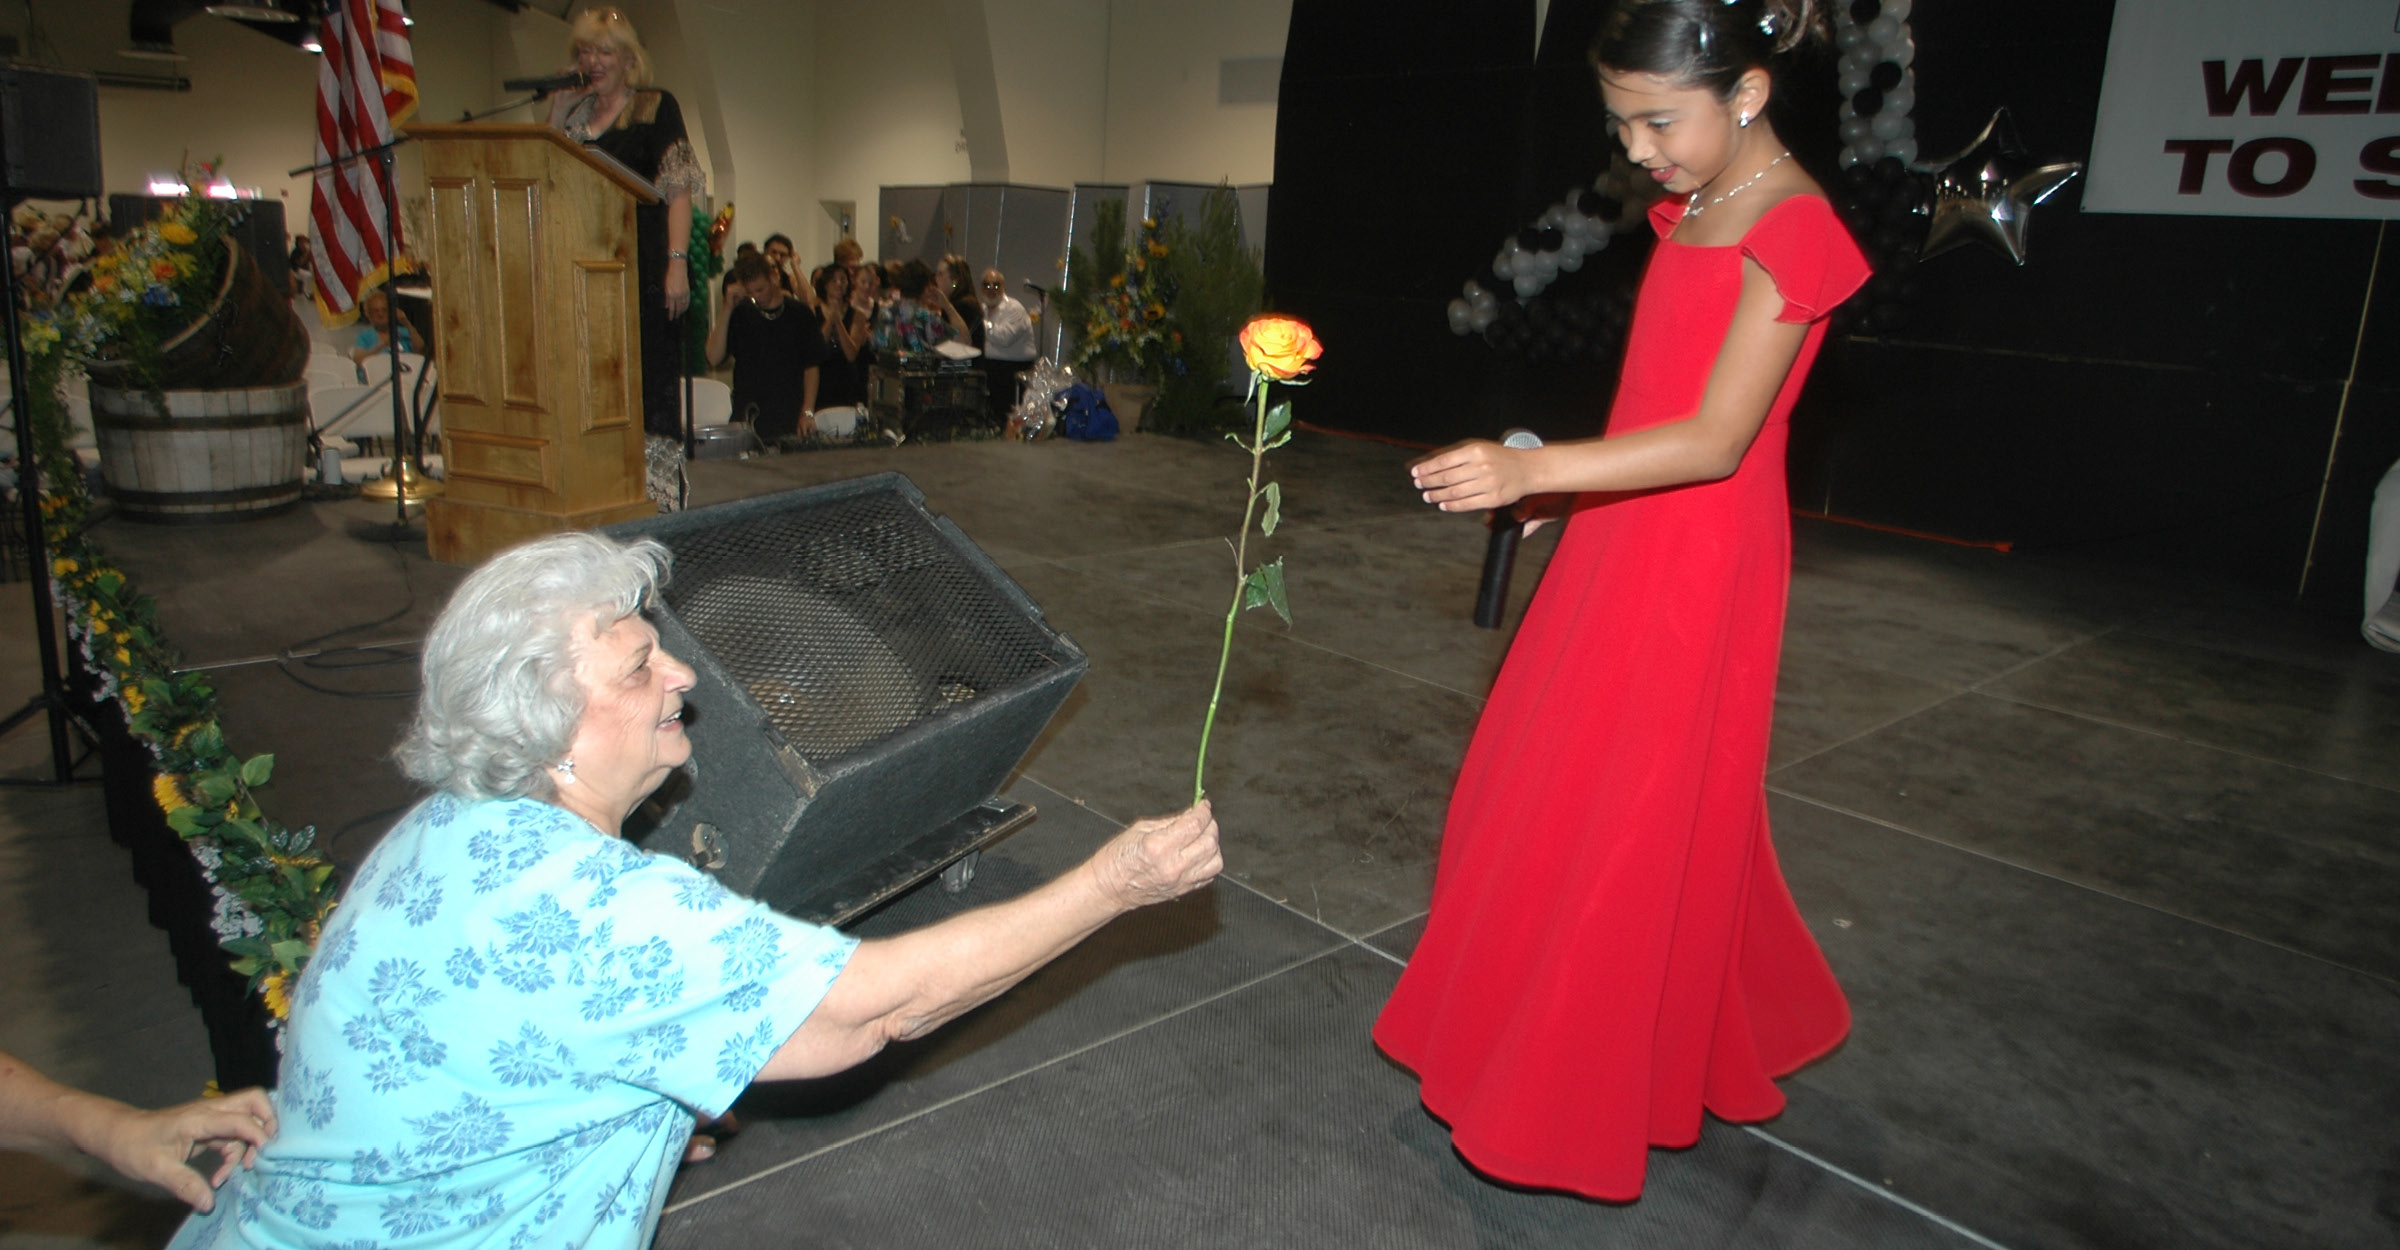 Senior giving a rose to a young perfomer